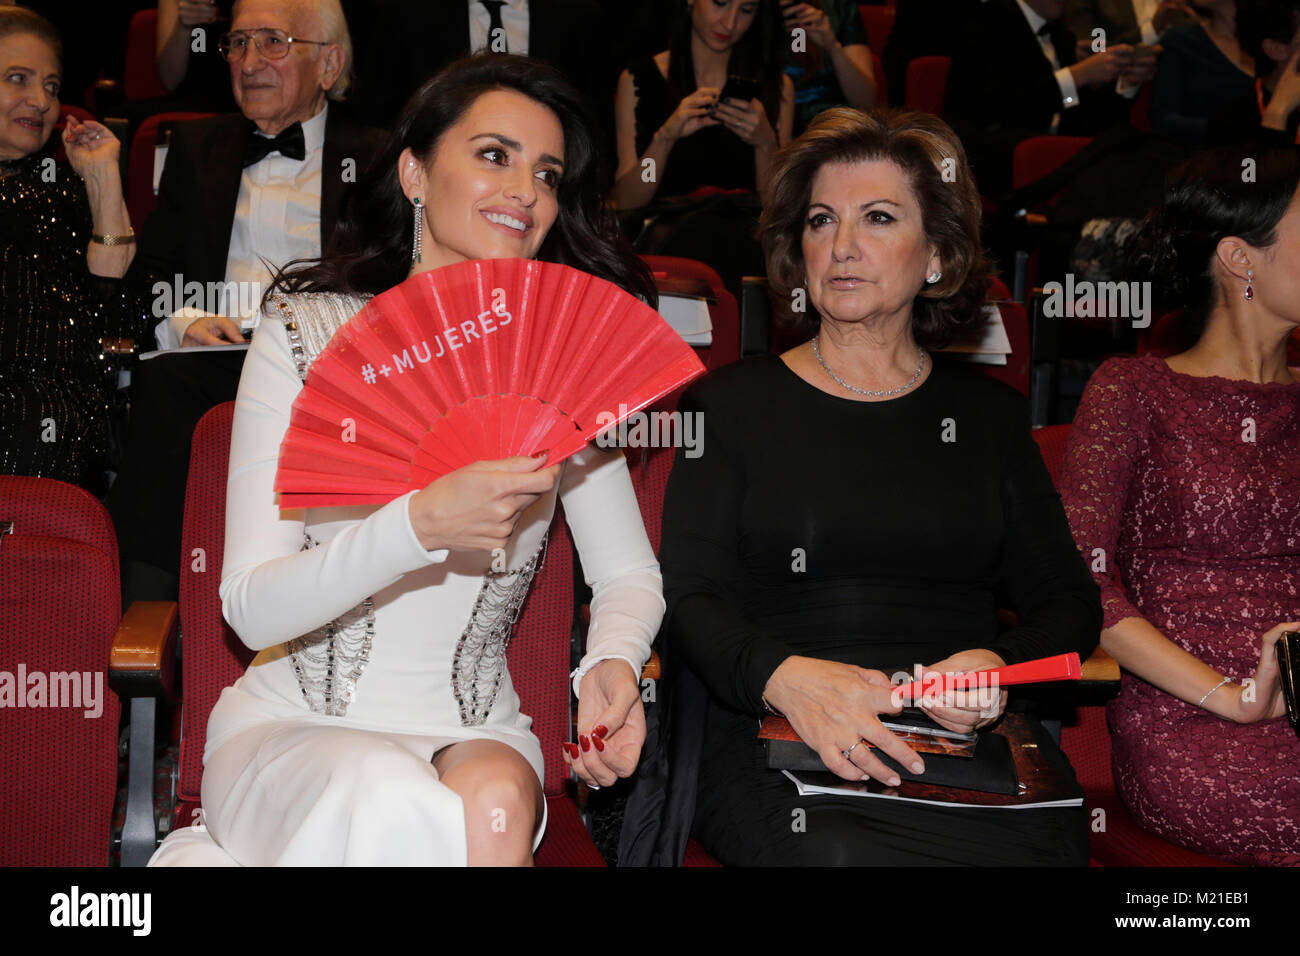 Actress Penelope Cruz and her mother Encarna Sanchez during the 32th annual Goya Film Awards in Madrid, on Saturday 3rd February, 2018. Credit: Gtres Información más Comuniación on line, S.L./Alamy Live News Stock Photo